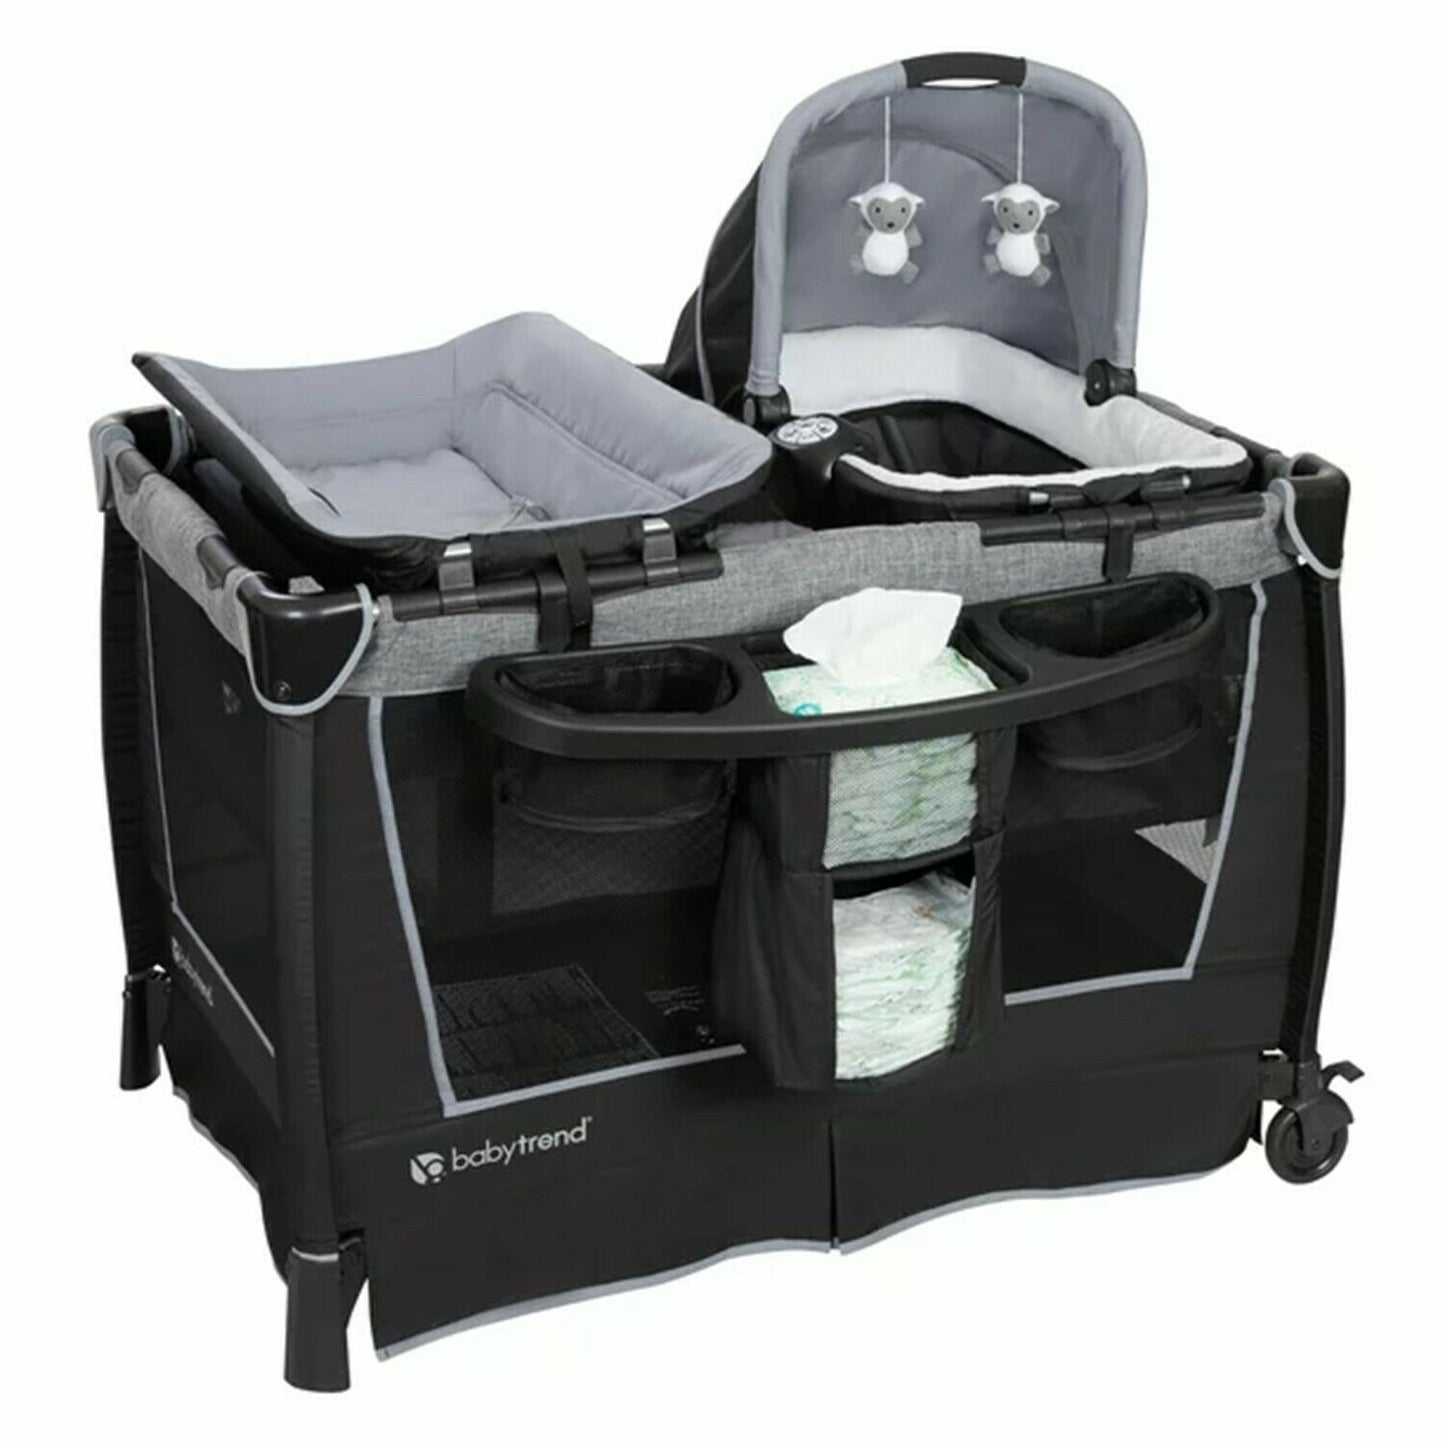 Baby Stroller with Car Seat Infant Child Playard Basinet Combo